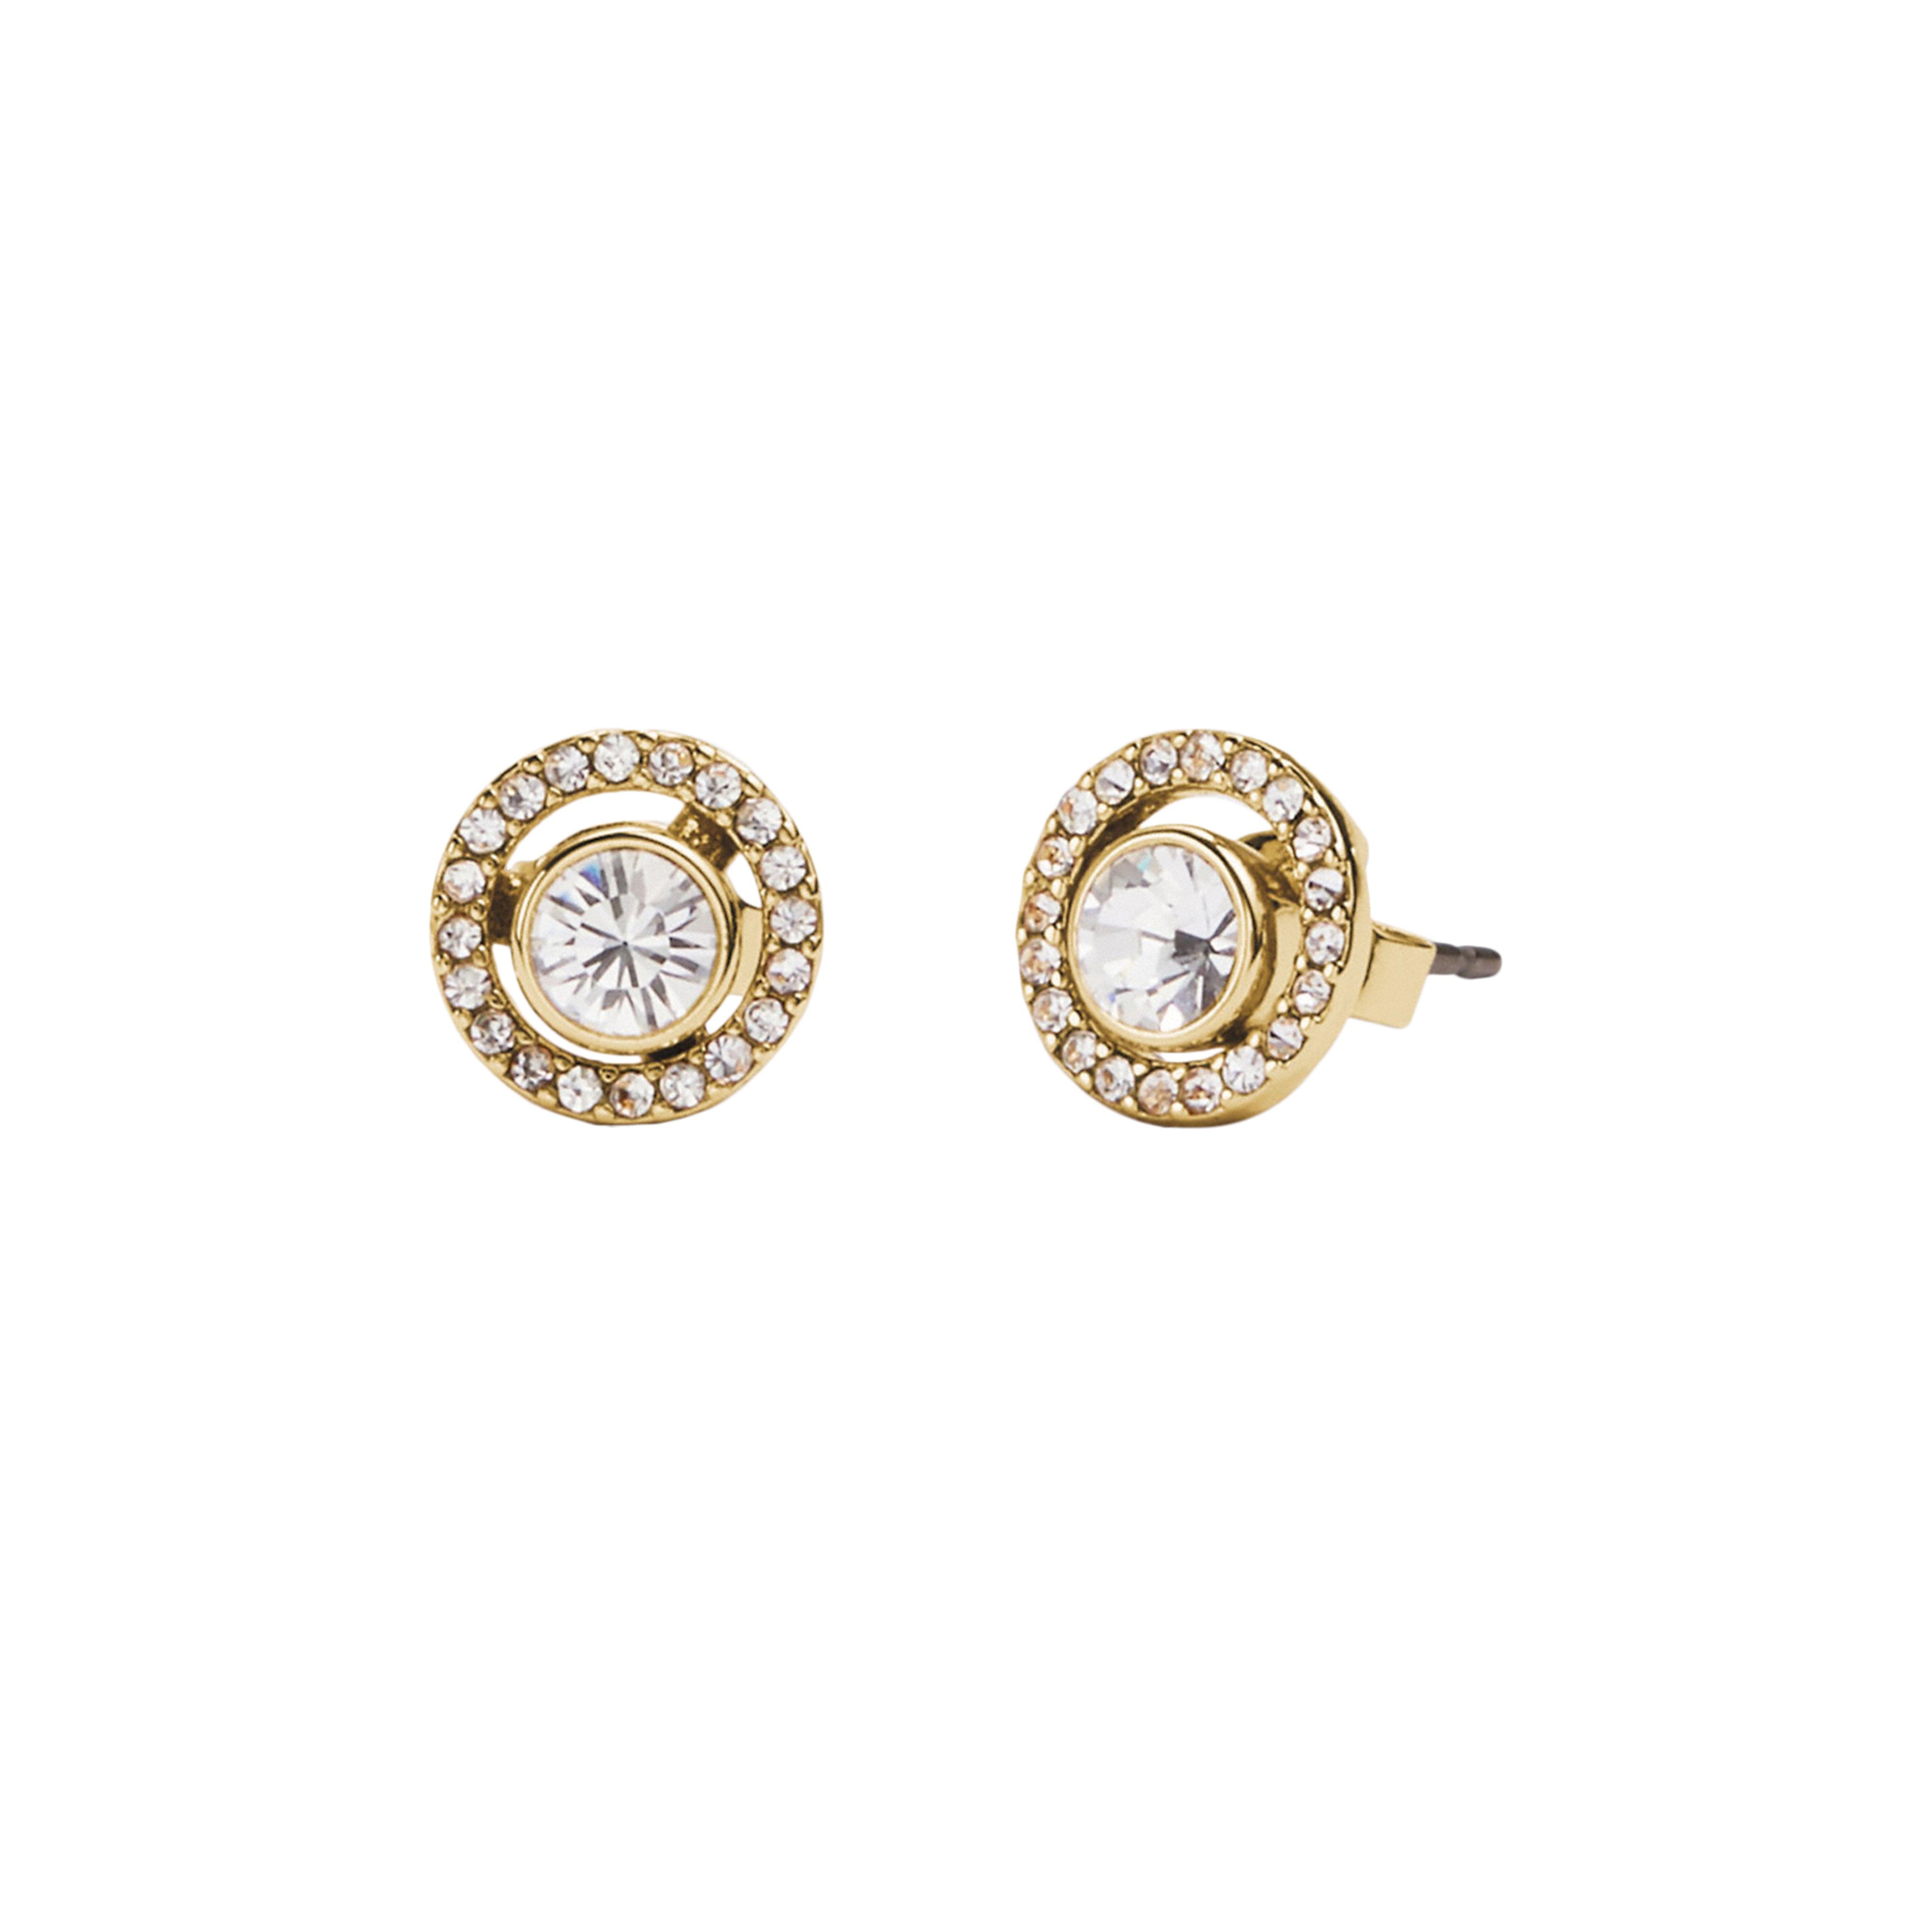 Gold-Tone Halo Pave Stud Earrings